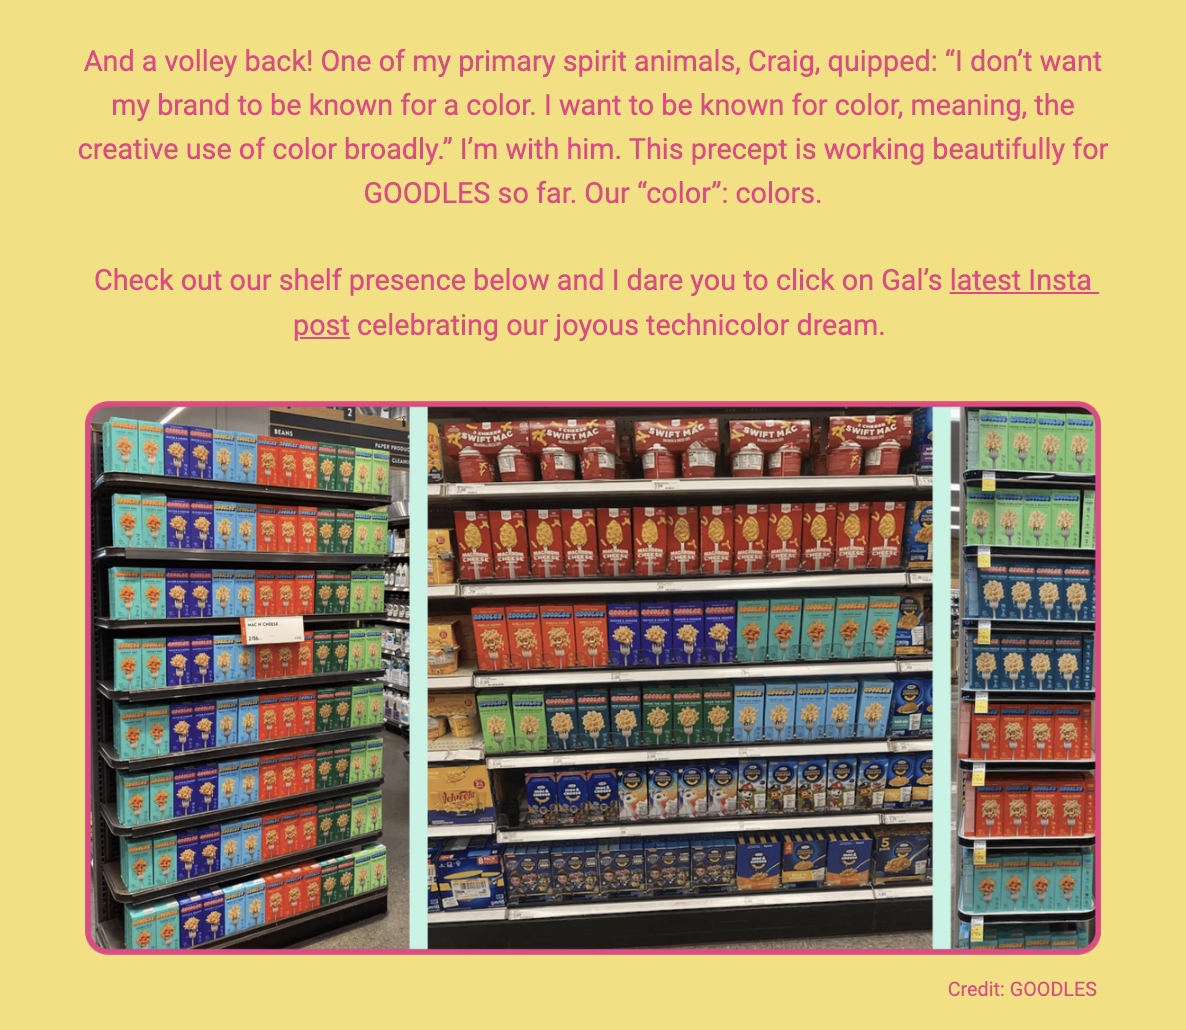 The image features a text dialogue and three photographs of grocery store shelves stacked with GOODLES macaroni and cheese products. The text discusses a conversation about the strategic use of color in branding, where an individual named Craig emphasizes his desire not to be known for a single color, but rather for a broad and creative use of color. The author agrees with this philosophy, noting its successful application in the branding of GOODLES products, which are shown in a variety of vibrant box colors on store shelves. The author invites viewers to check out the shelf presence of the products and suggests visiting Gal's latest Instagram post to see more of the brand's colorful display.

The text within the image reads:
"And a volley back! One of my primary spirit animals, Craig, quipped: “I don’t want my brand to be known for a color. I want to be known for color, meaning, the creative use of color broadly.” I’m with him. This precept is working beautifully for GOODLES so far. Our “color”: colors.

Check out our shelf presence below and I dare you to click on Gal’s latest Insta post celebrating our joyous technicolor dream.

Credit: GOODLES"